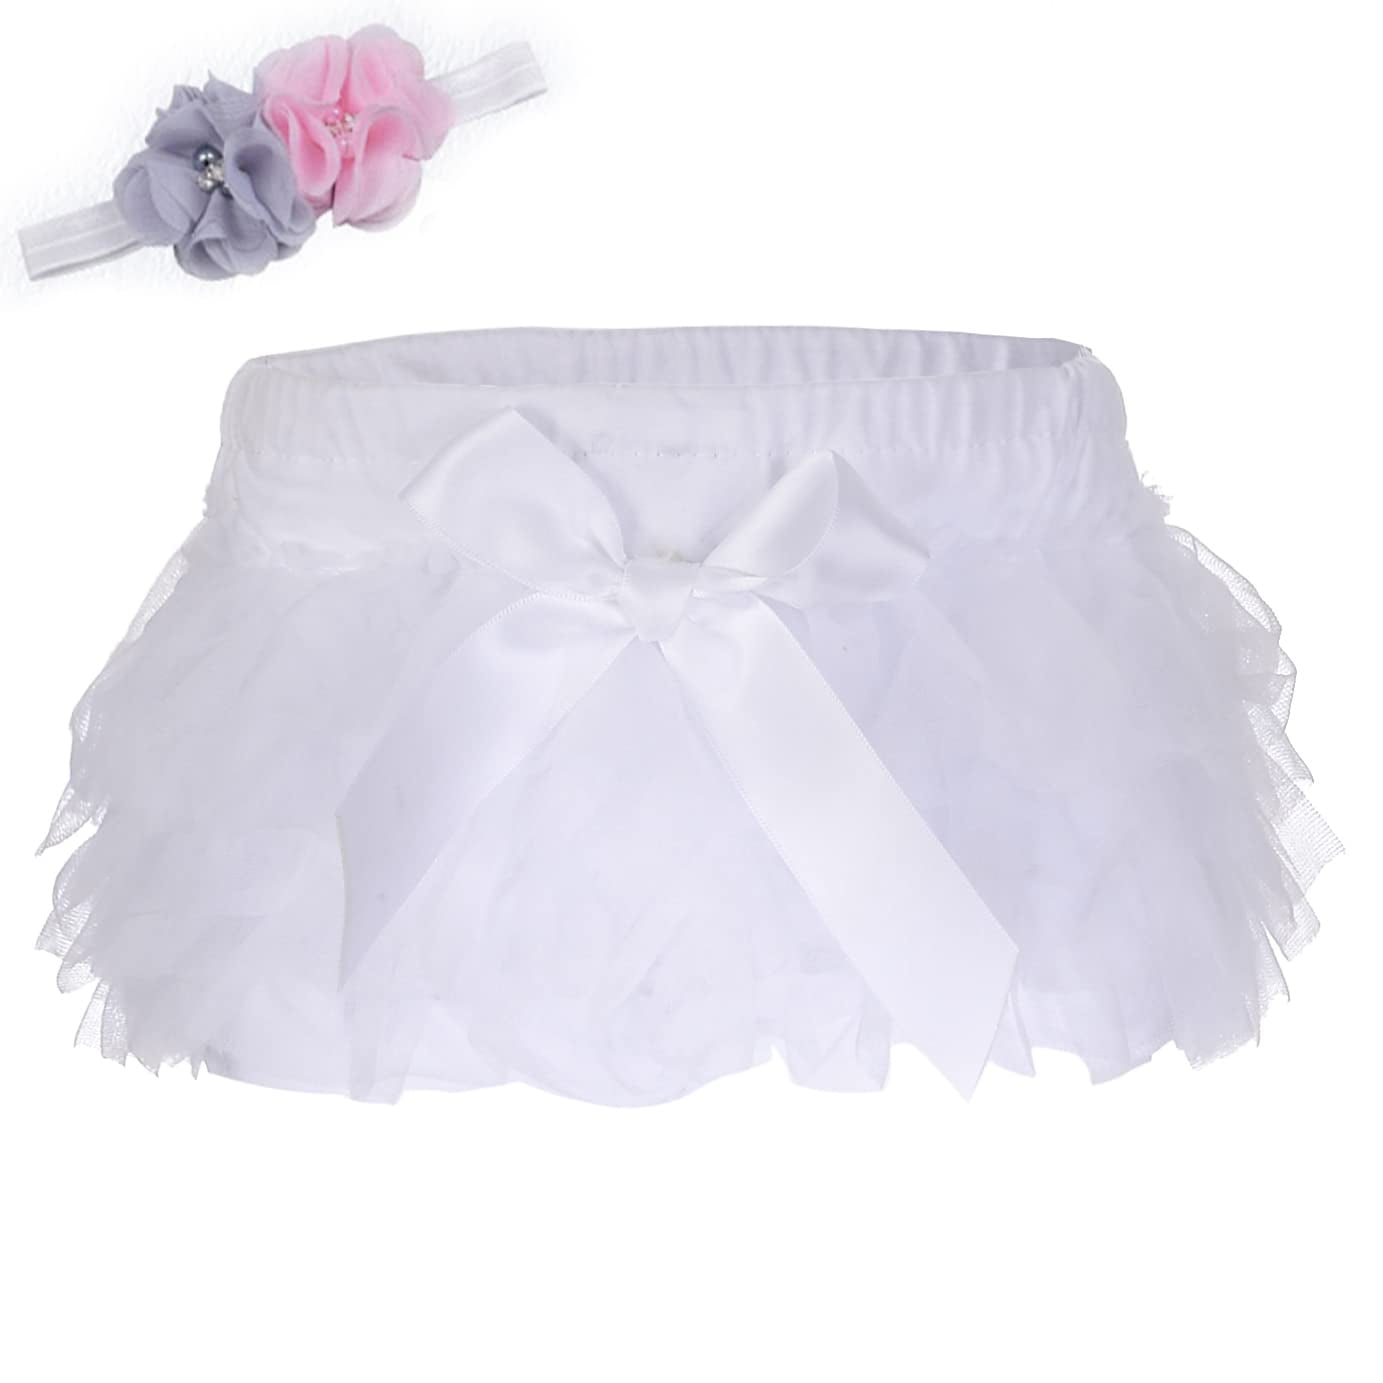 Lucky-BB Baby Girls'Tutu Bloomers Newborn Toddler Cotton Tulle Ruffle Diaper  Covers with Bow White, M-0-6 months 